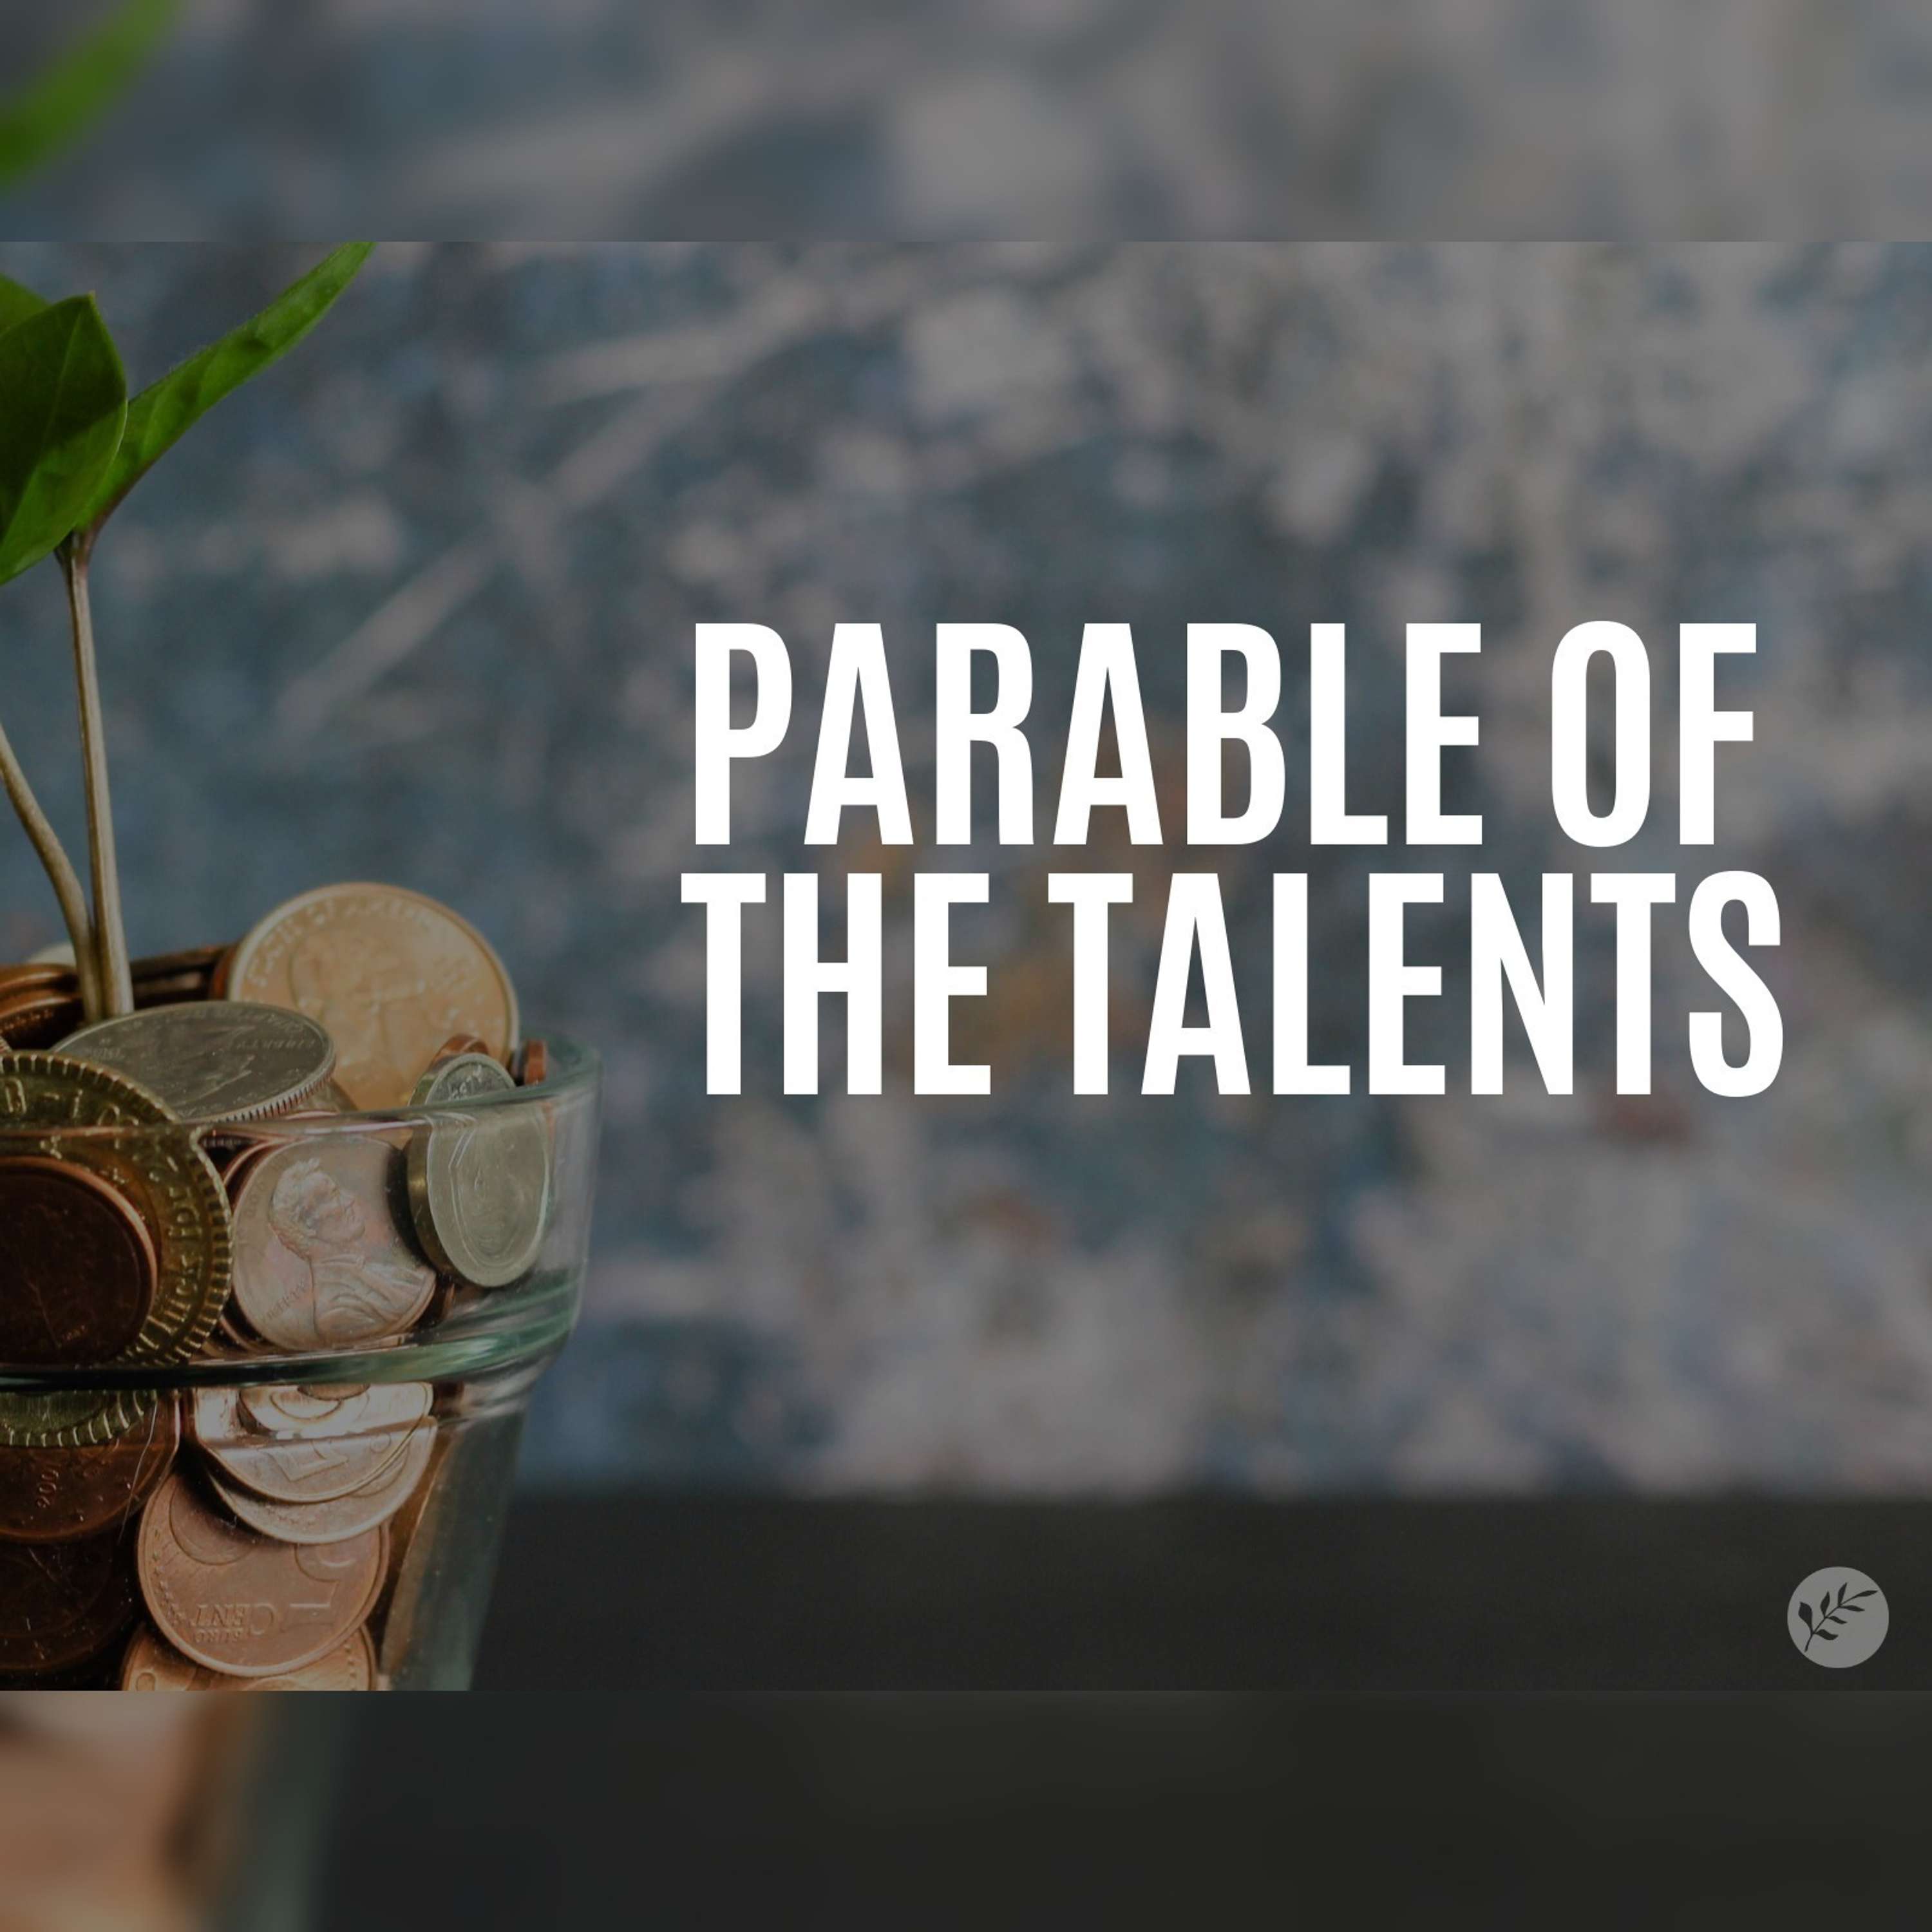 The Parable of the Talents | Matthew 25:14-30